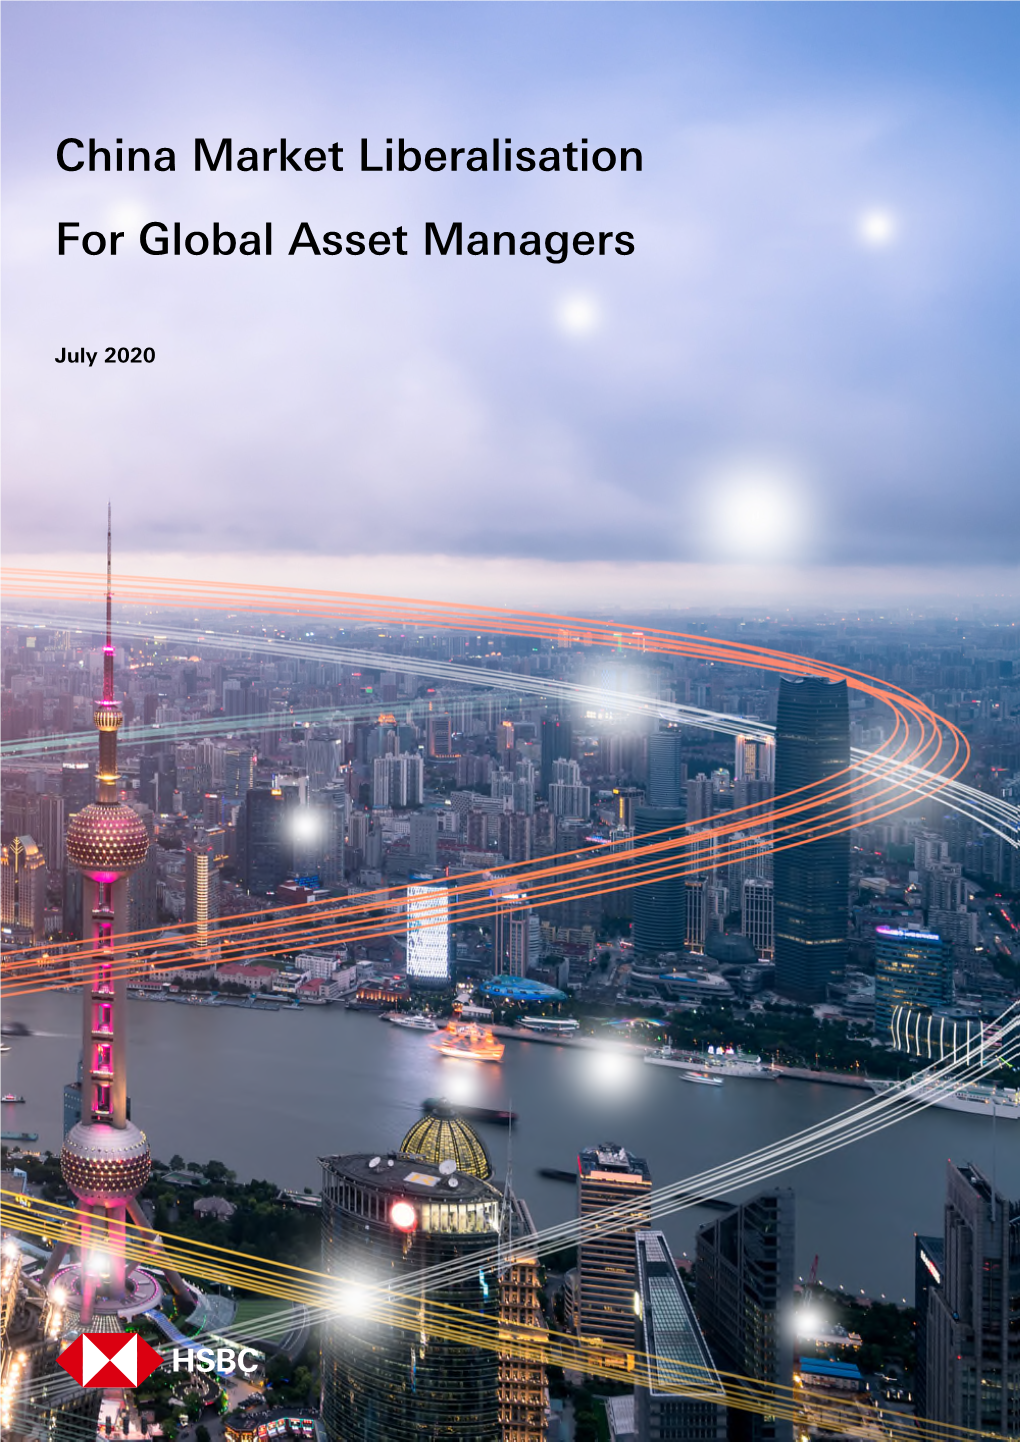 China Market Liberalisation for Global Asset Managers